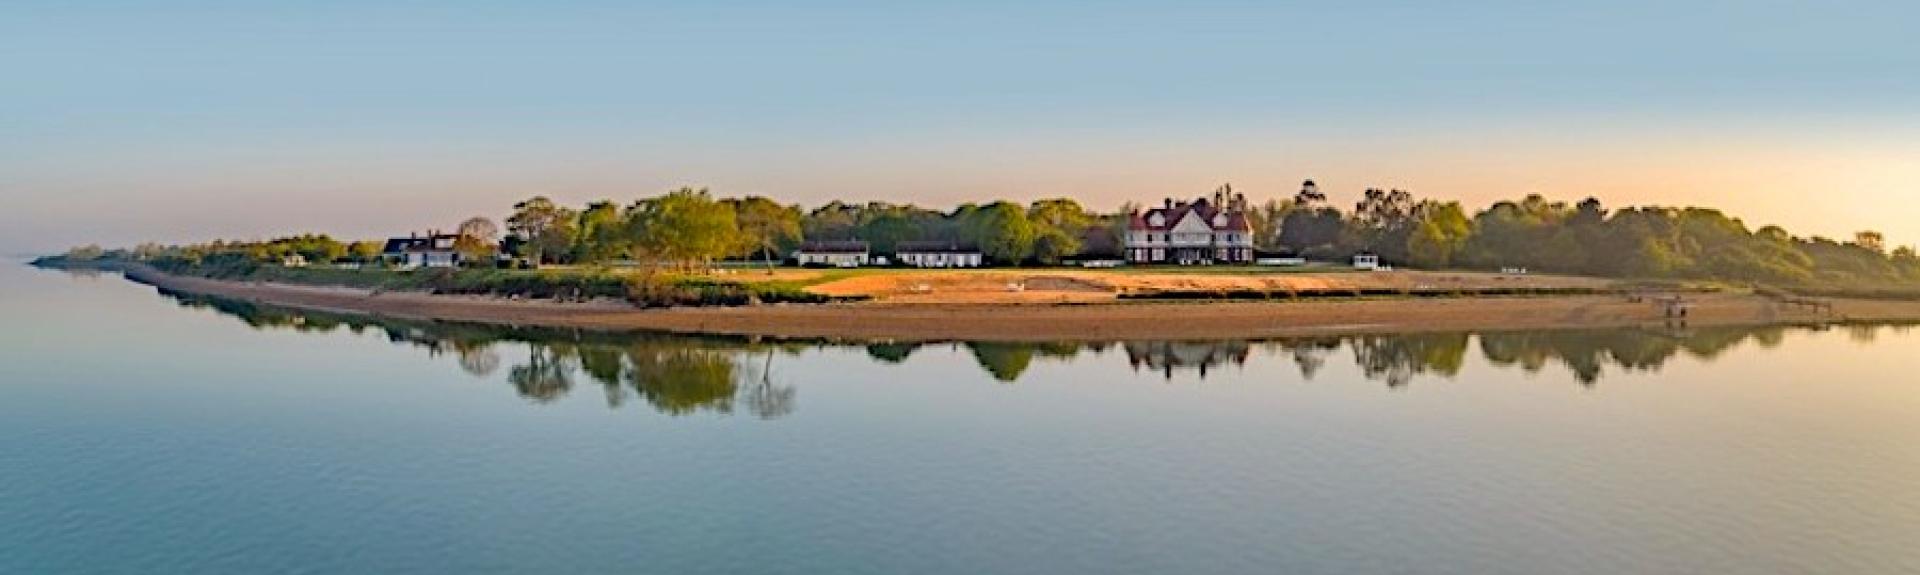 A low Island with trees. A handful of Essex holiday cottages and sandy beaches are reflected in a calm sea